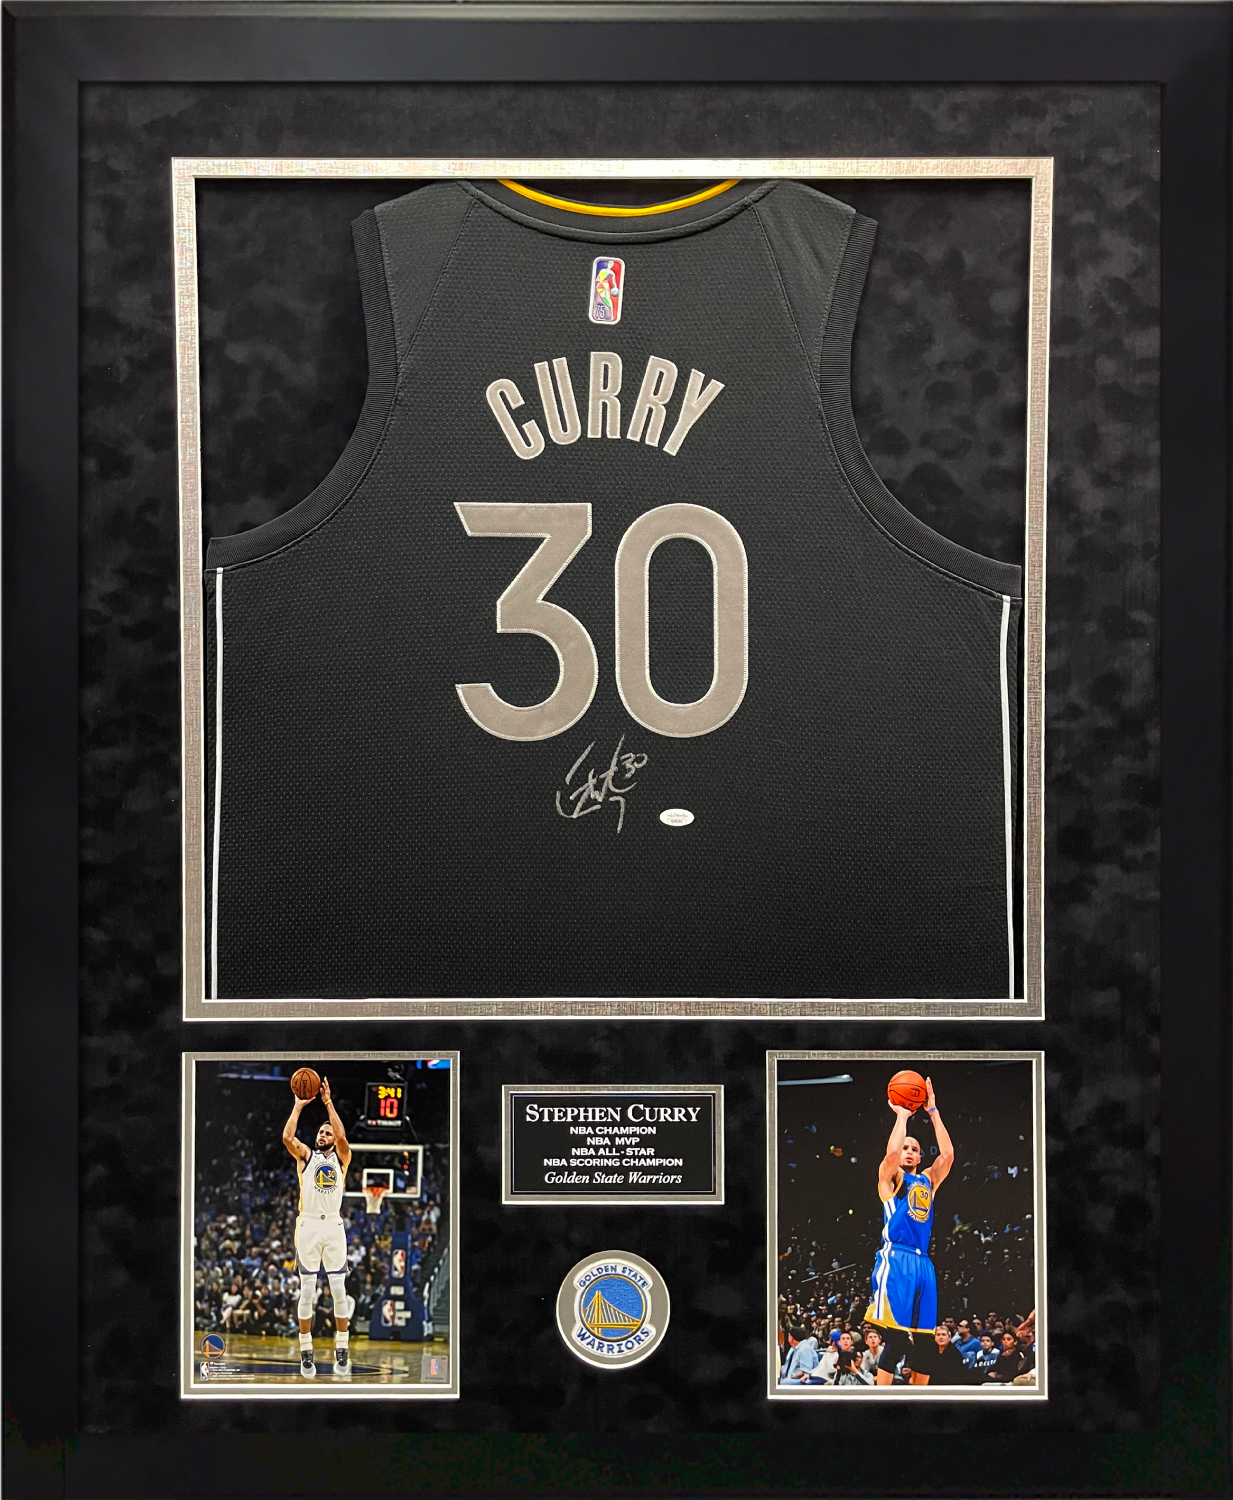 stephen curry black all star jersey